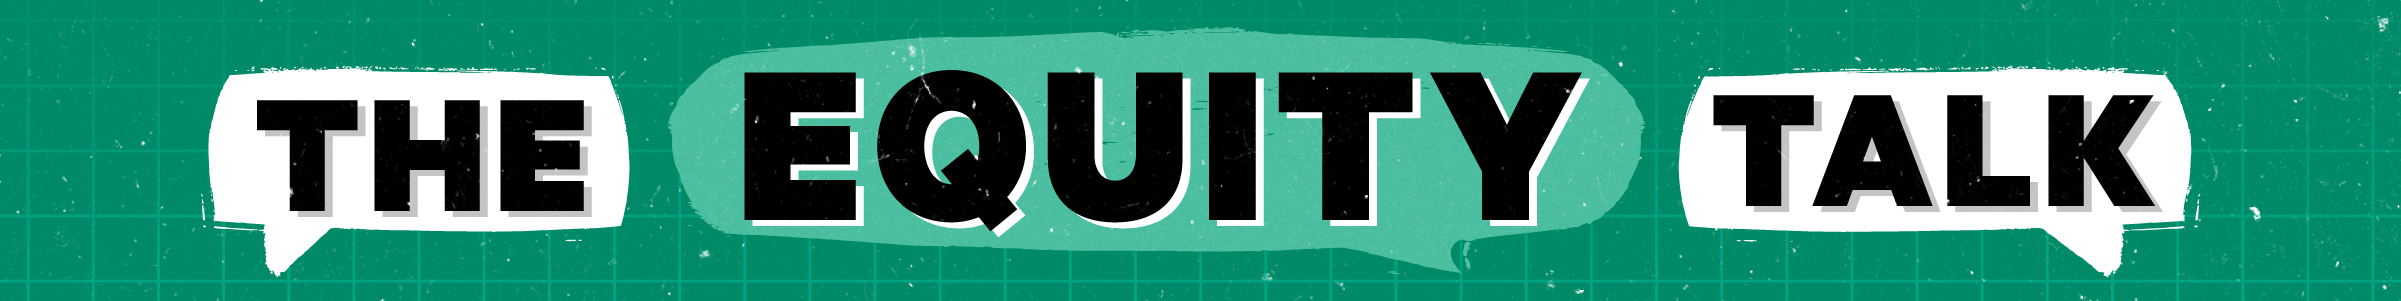 A banner with "The Equity Talk" in talk bubbles with smaller faint talk bubbles behind it on a gridded green background